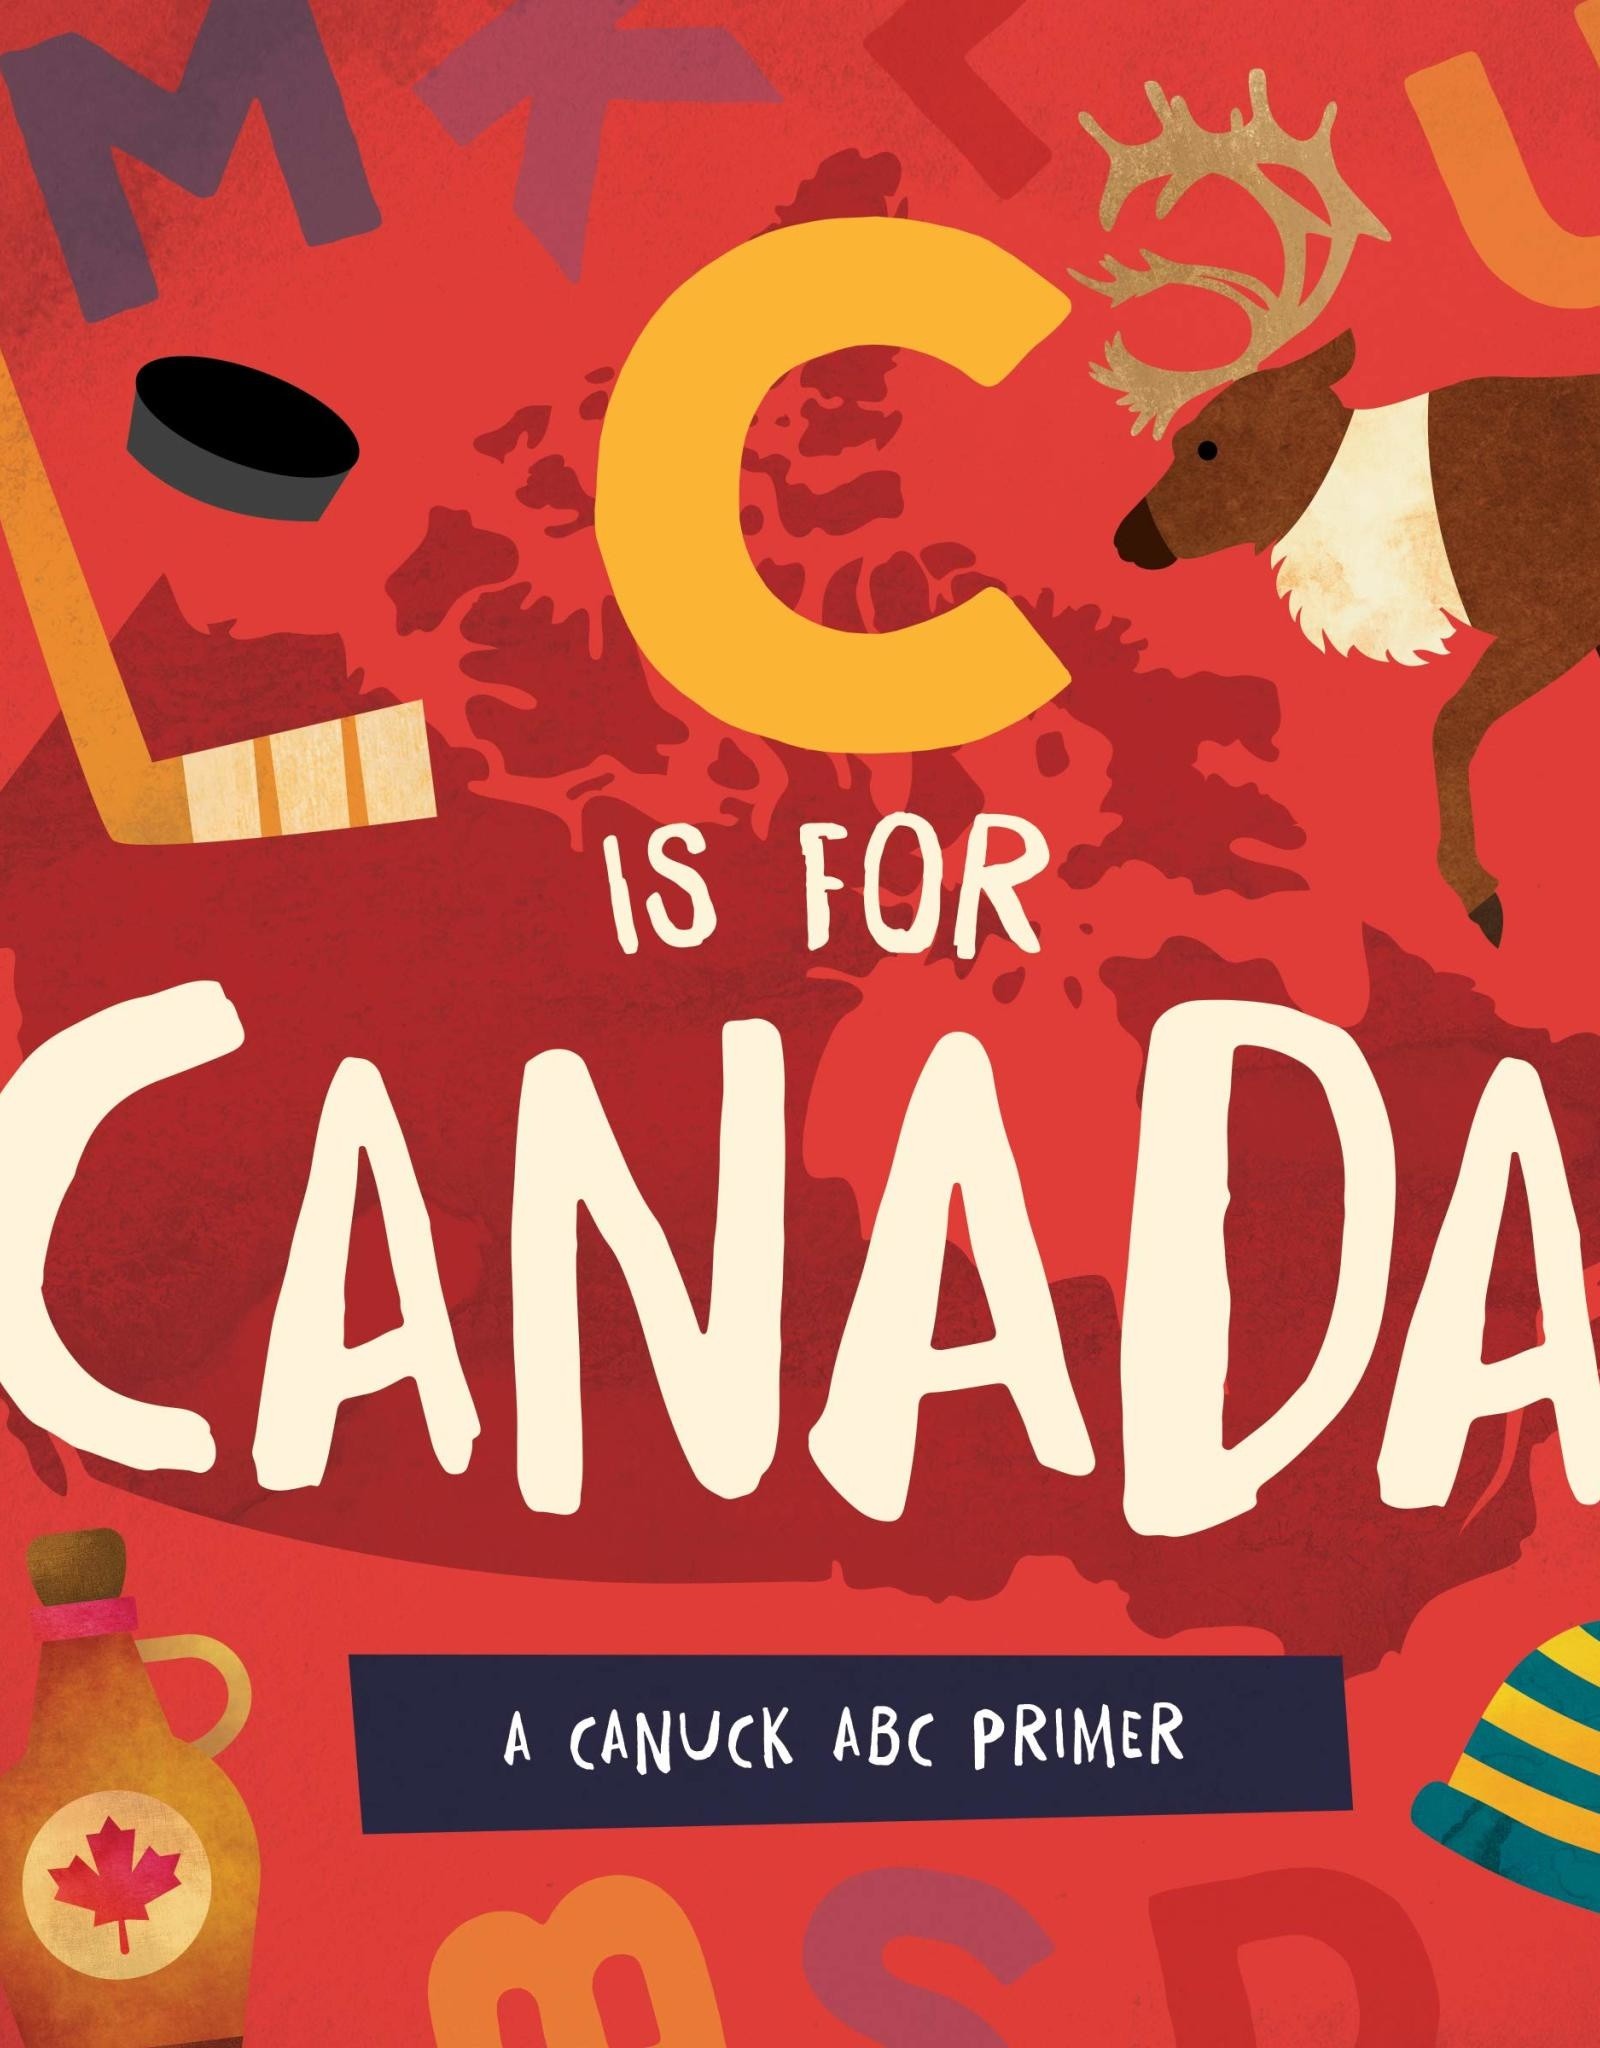 C is for Canada